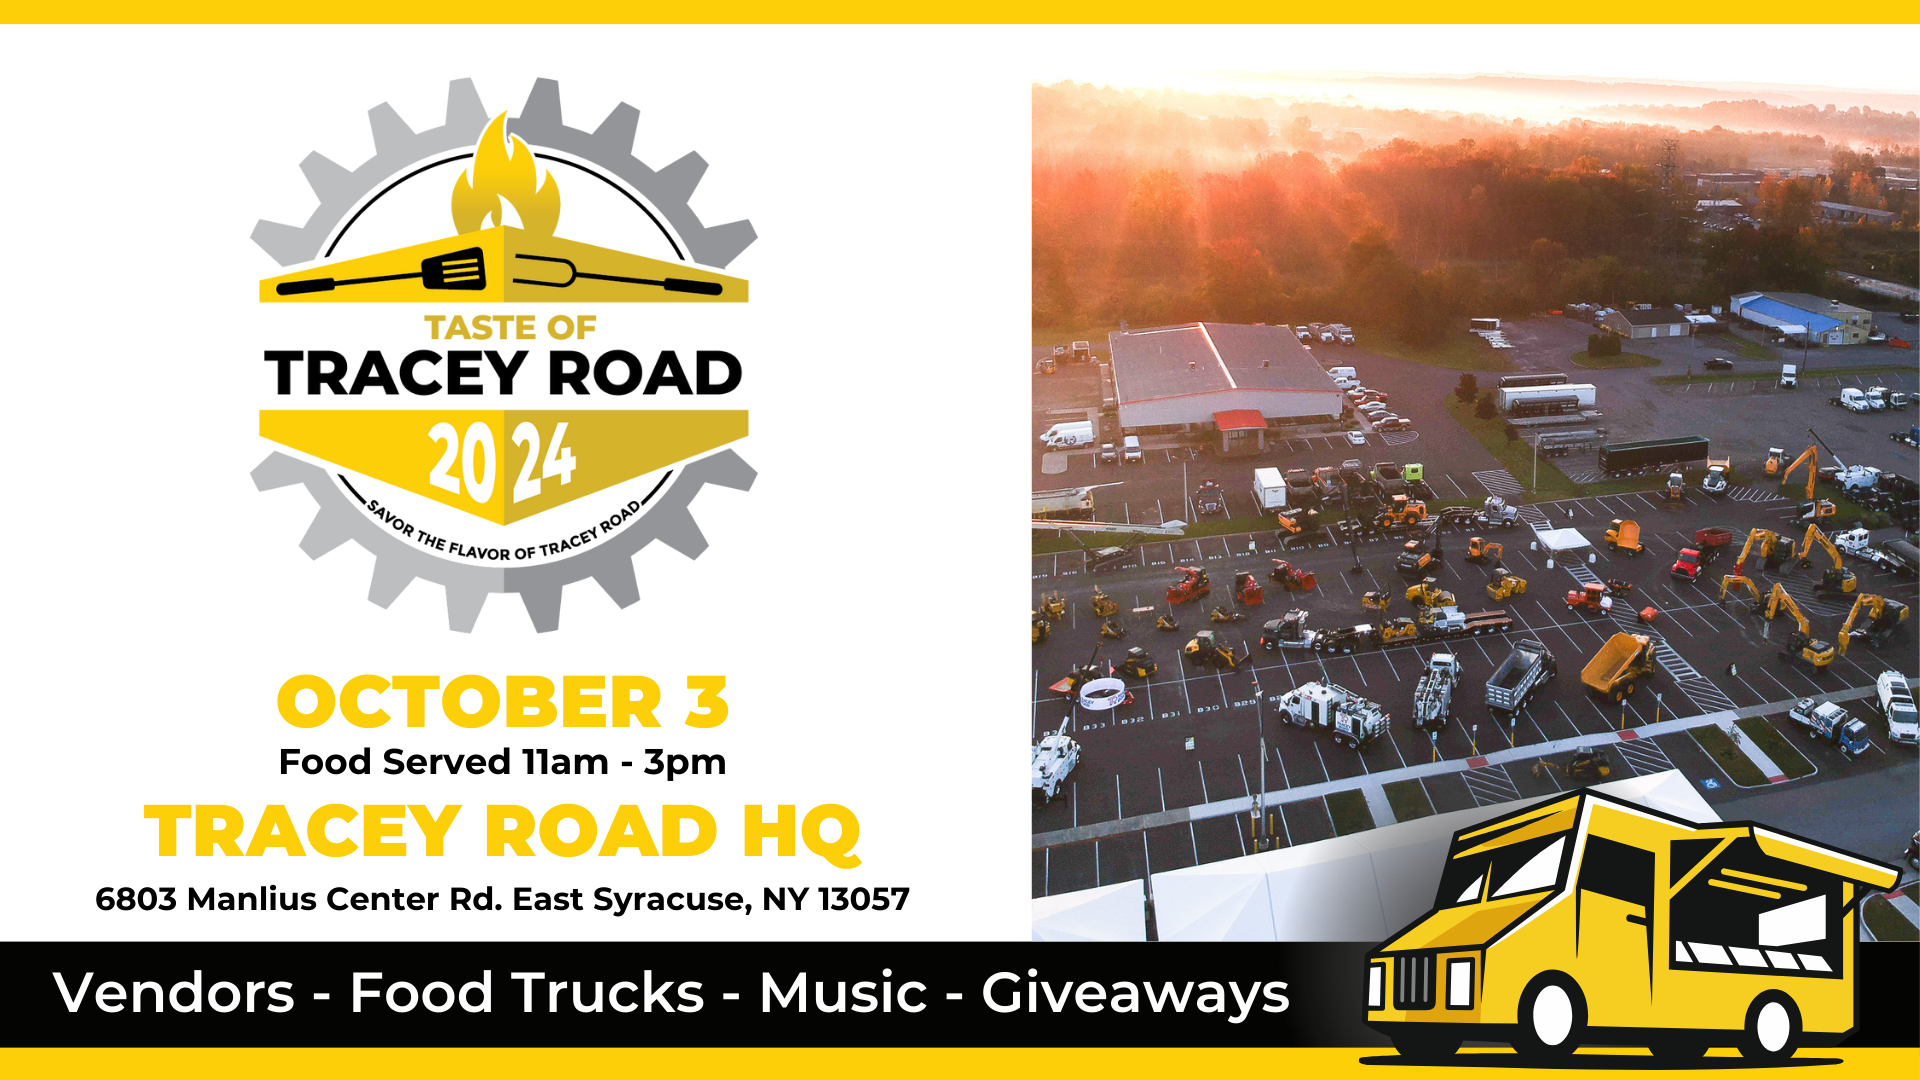 Advertisement for the Taste of Tracey Road 2024 event featuring an aerial view of Tracey Road headquarters with heavy equipment displayed in the parking lot.